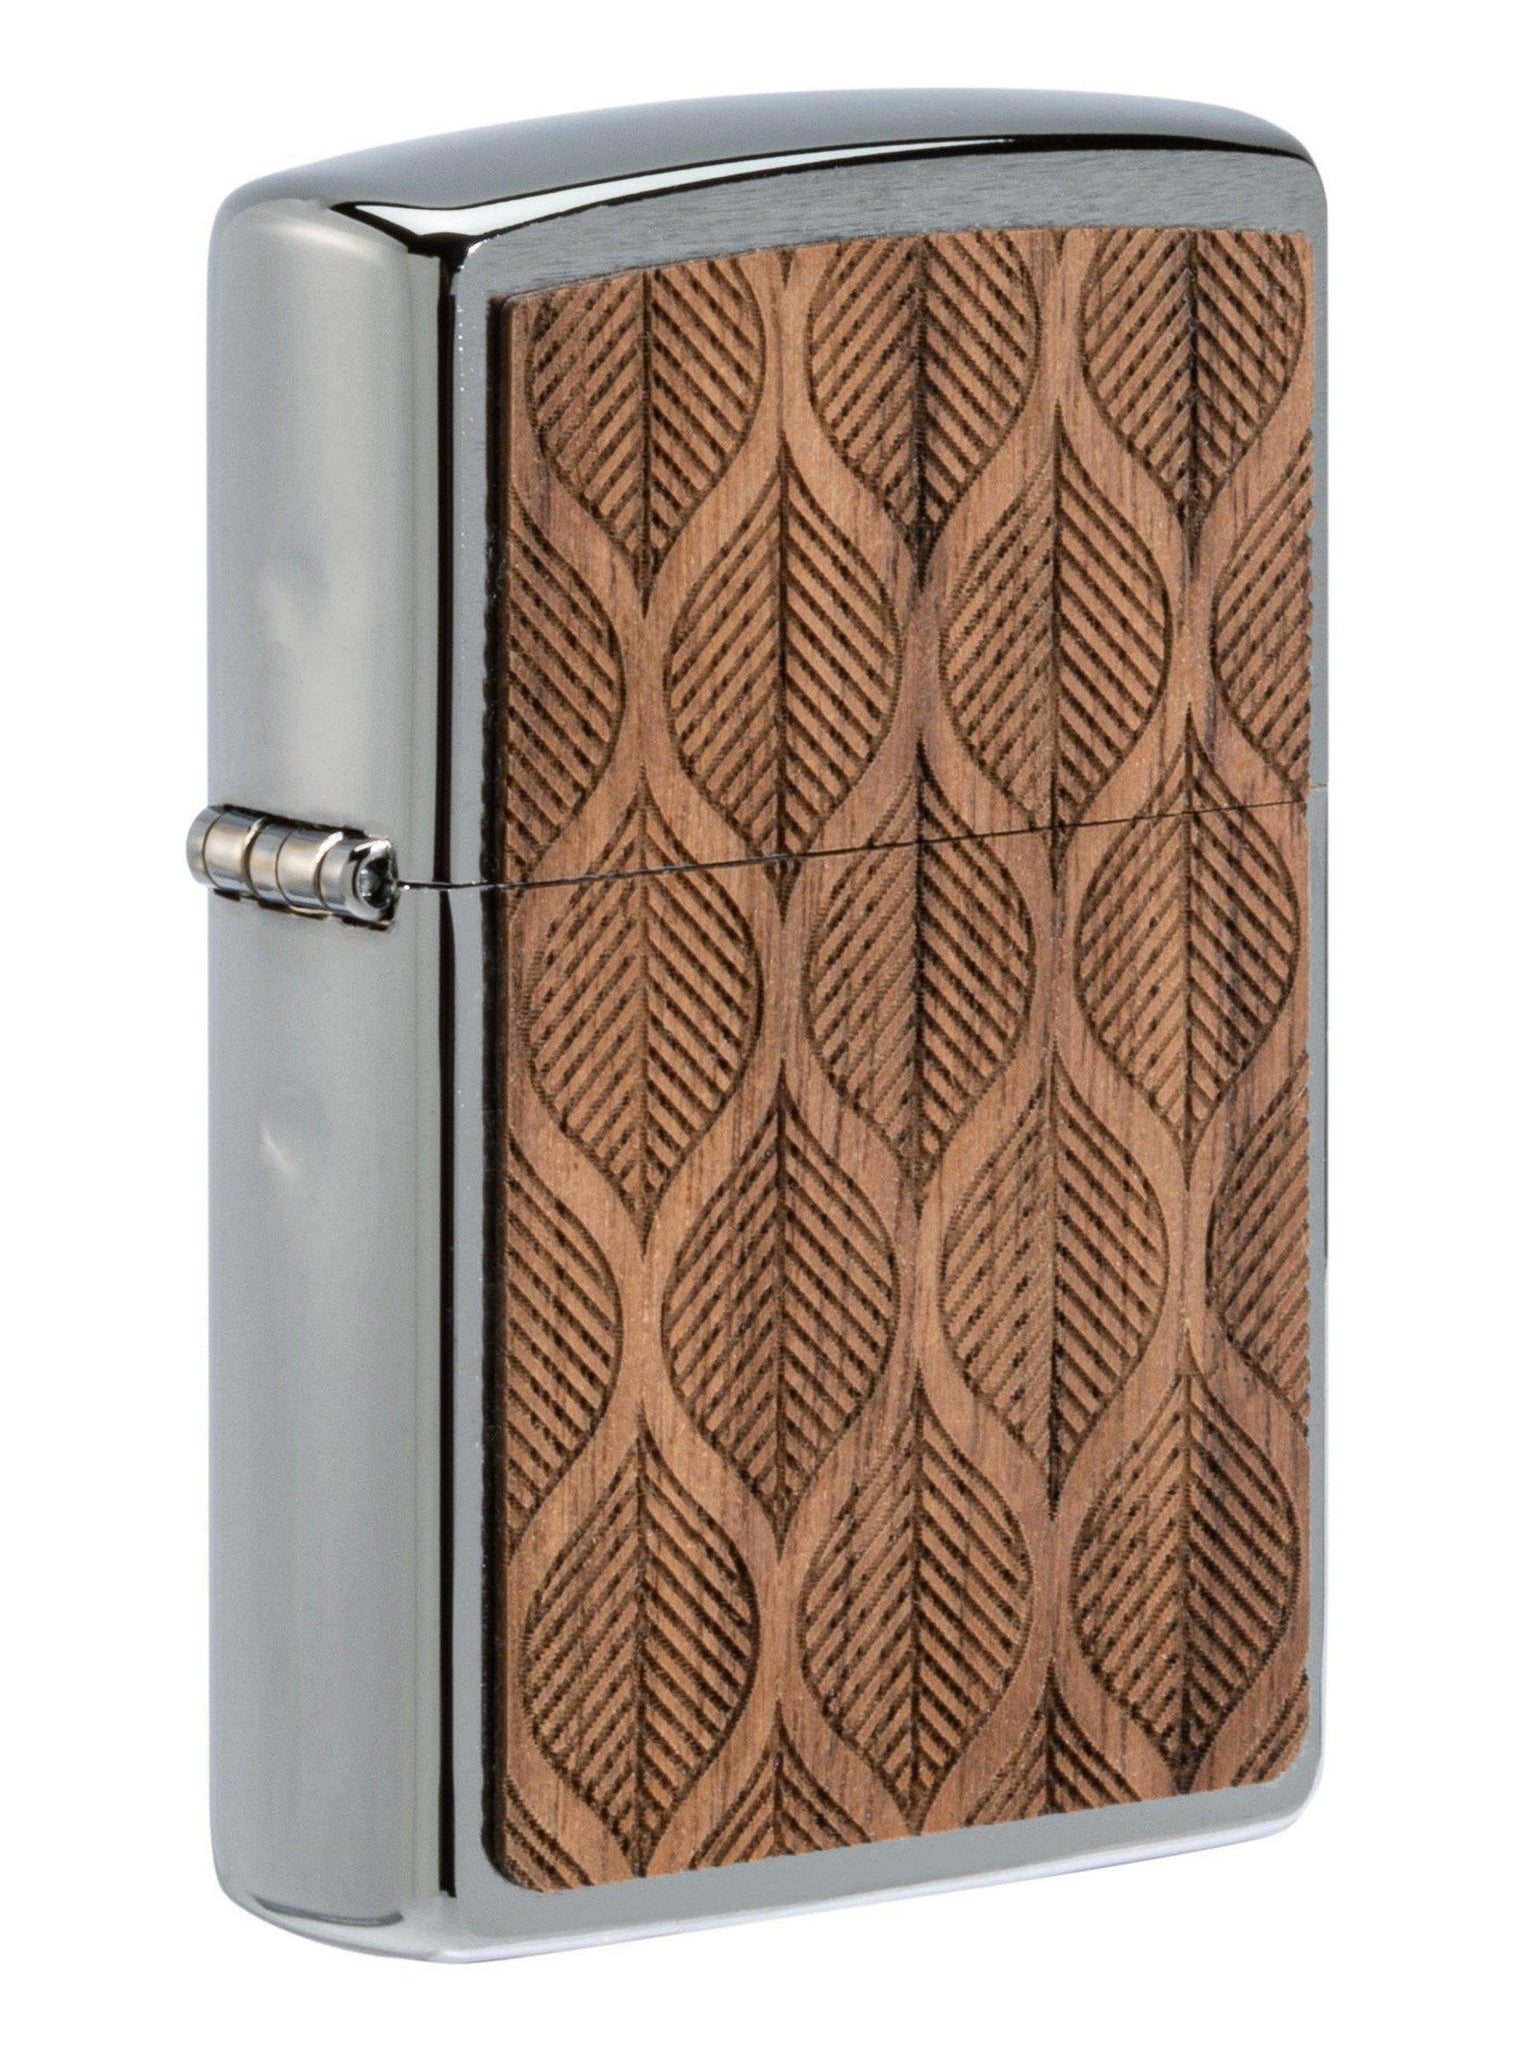 Zippo Lighter: Woodchuck Walnut with Leaves - Brushed Chrome 49708